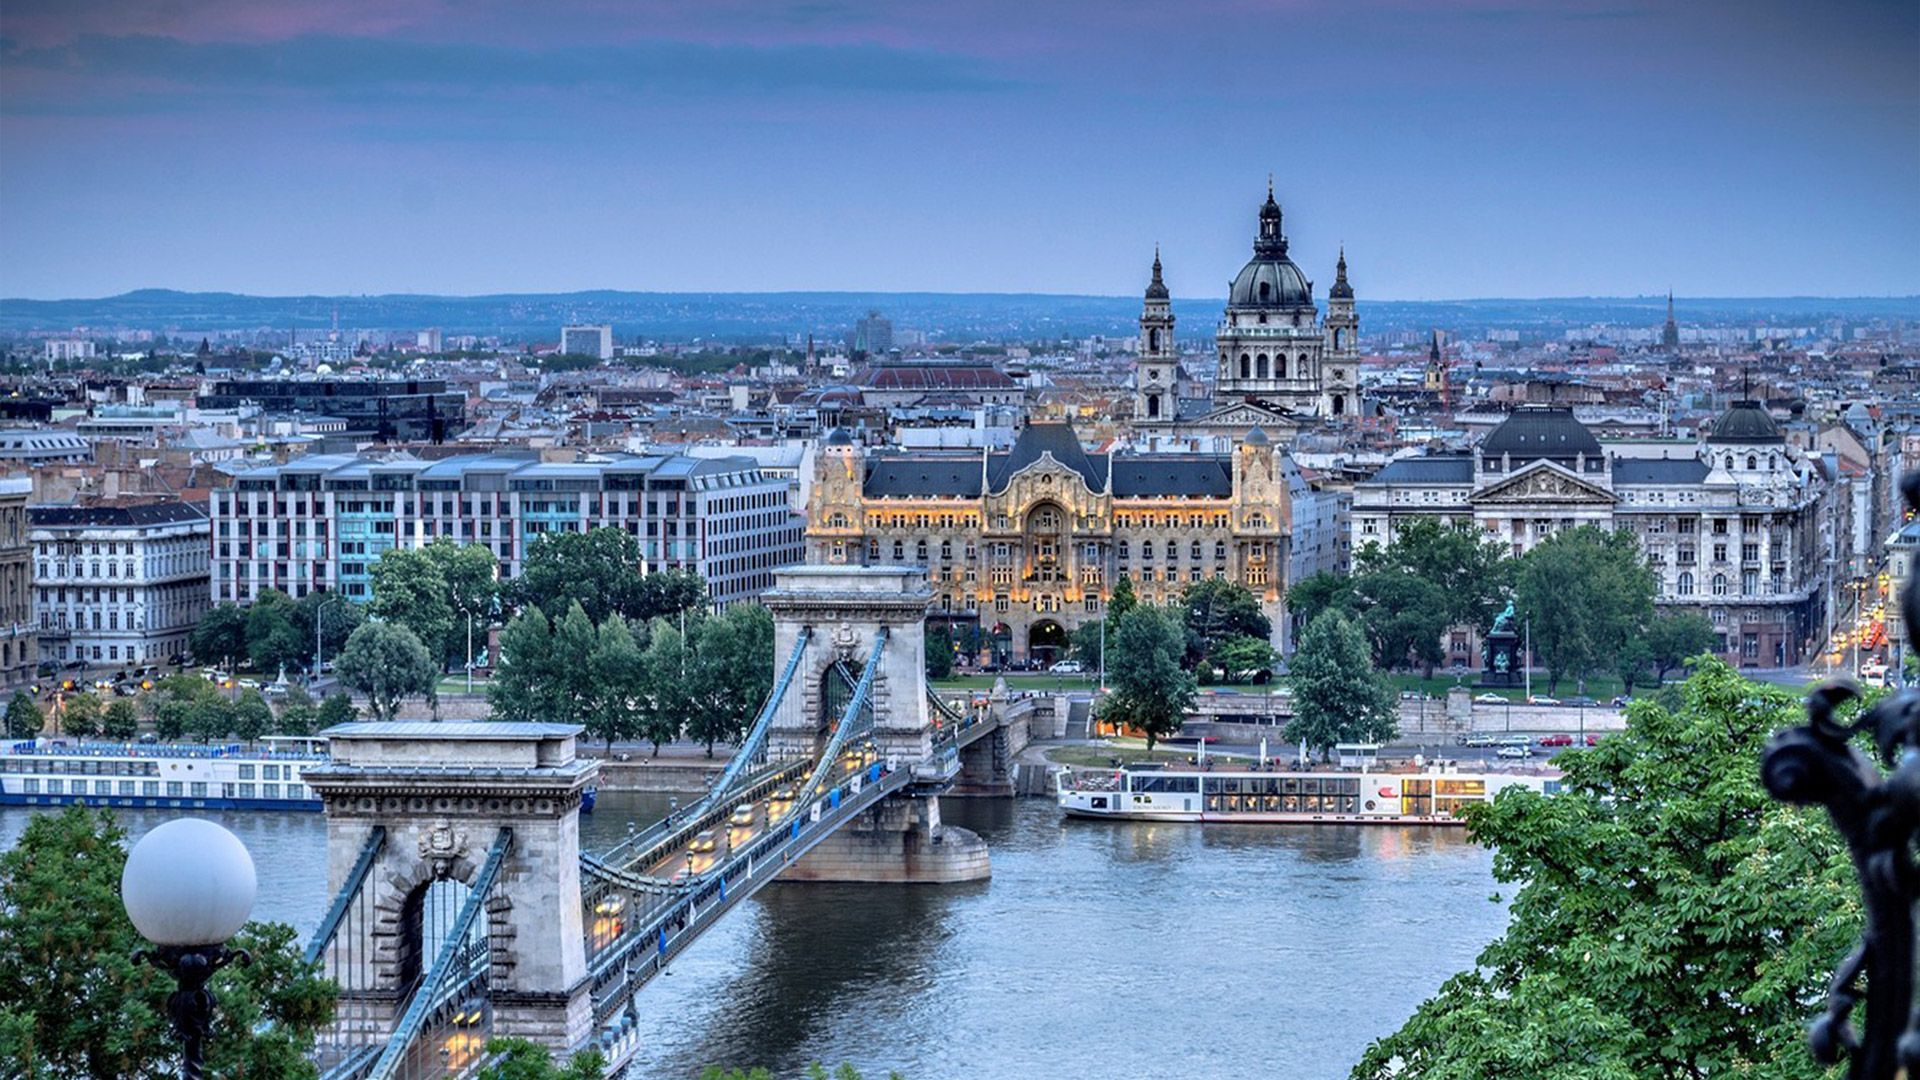 With PayPorter, you can make fast, easy and safe money transfers to Hungary at the most affordable prices!